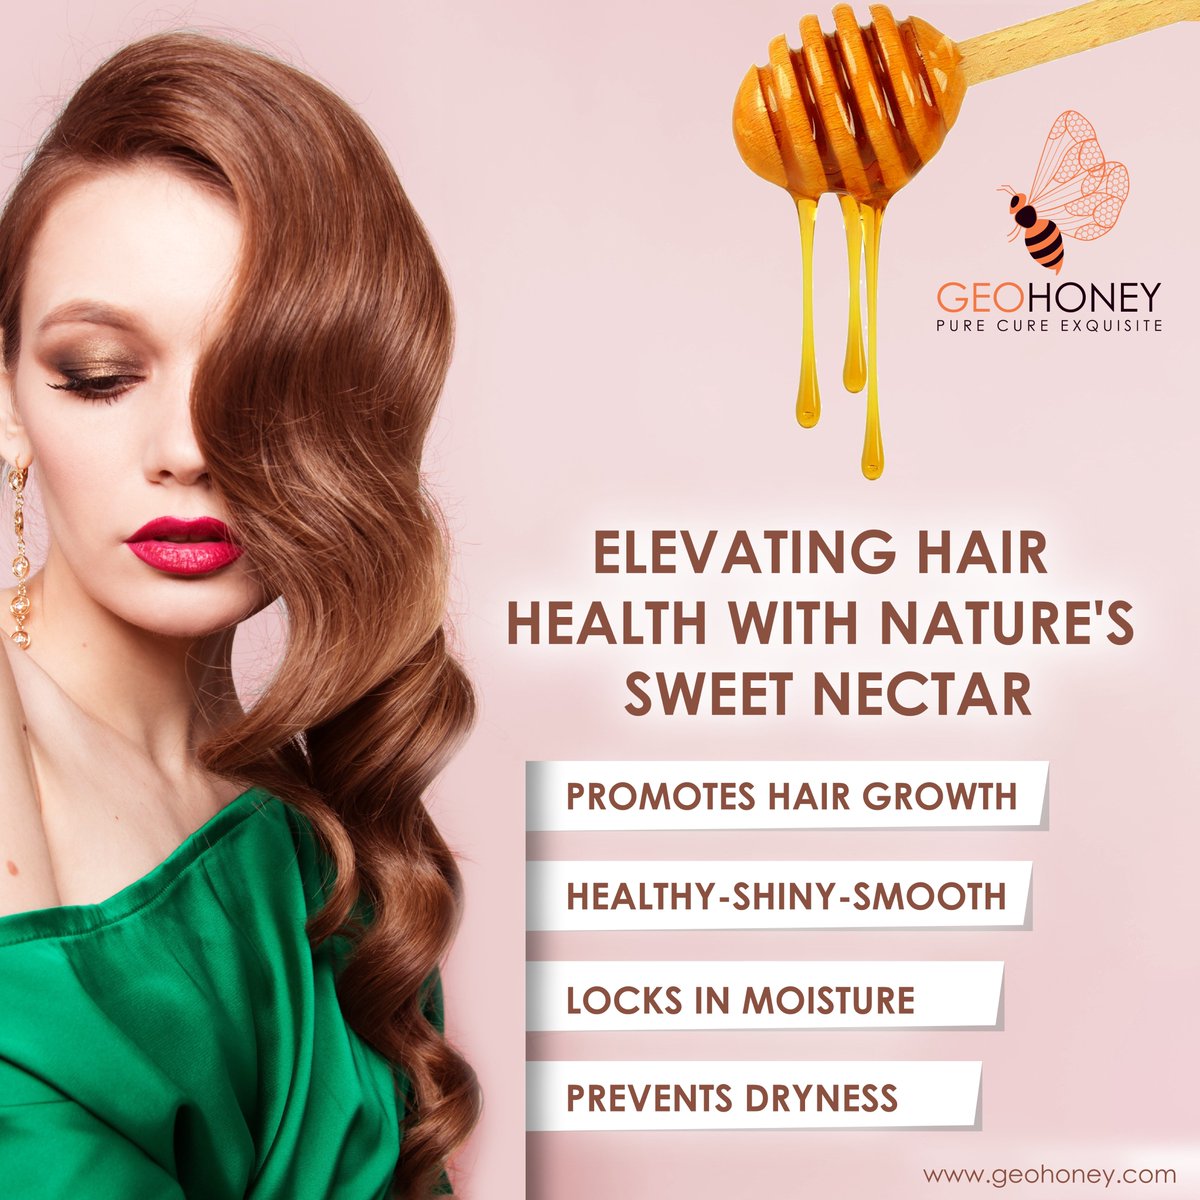 Revitalize your hair care routine with honey! Soothe your scalp, promote growth, and embrace healthy, gorgeous hair.

#haircare #honeybenefits #beauty #honey #Geohoney https://t.co/qNQTCrcqP3